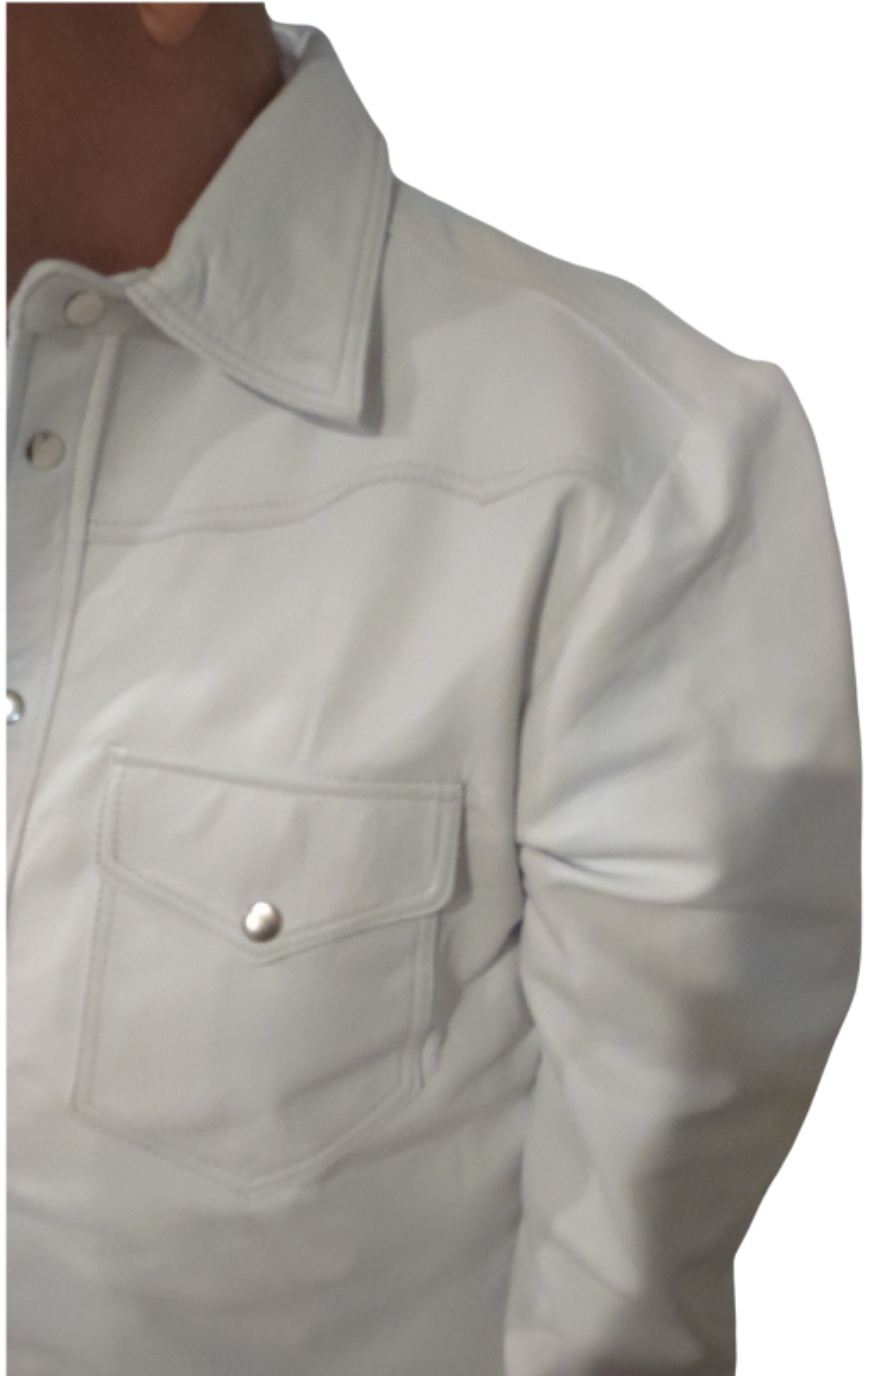 Picture of a model wearing our Mens White Leather Shirt, close up view of the pocket and collar.